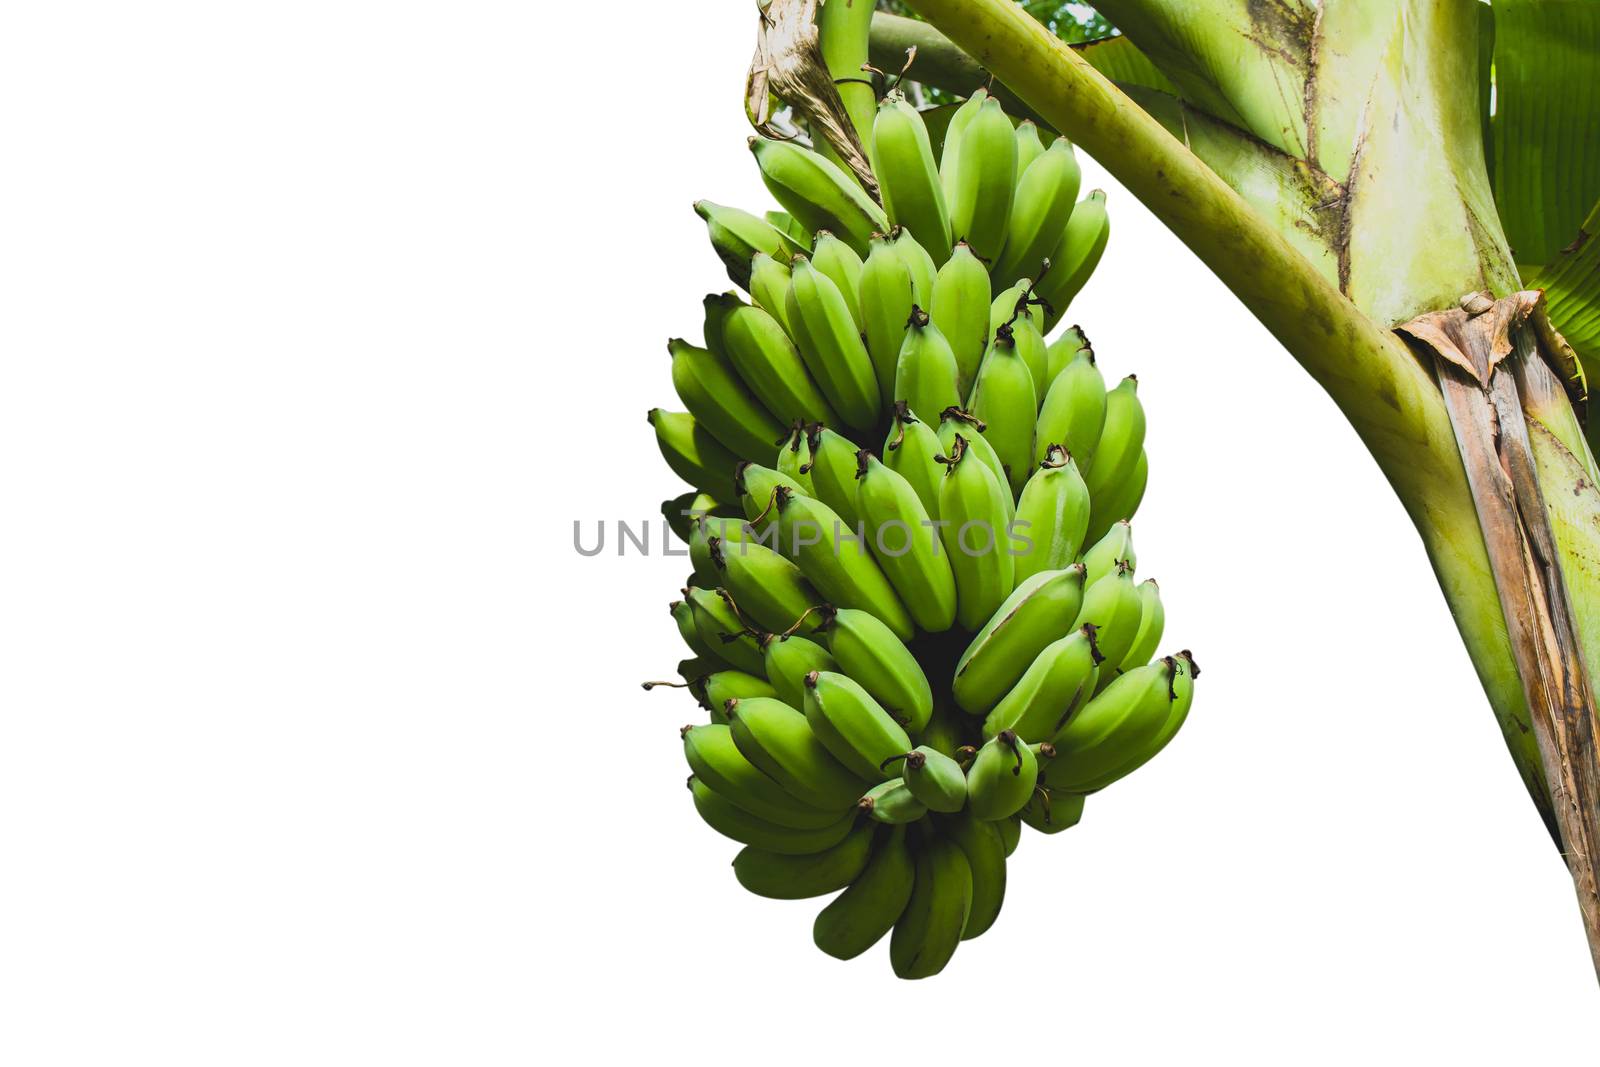 Bananas with banana tree isolated over white background with clipping path.